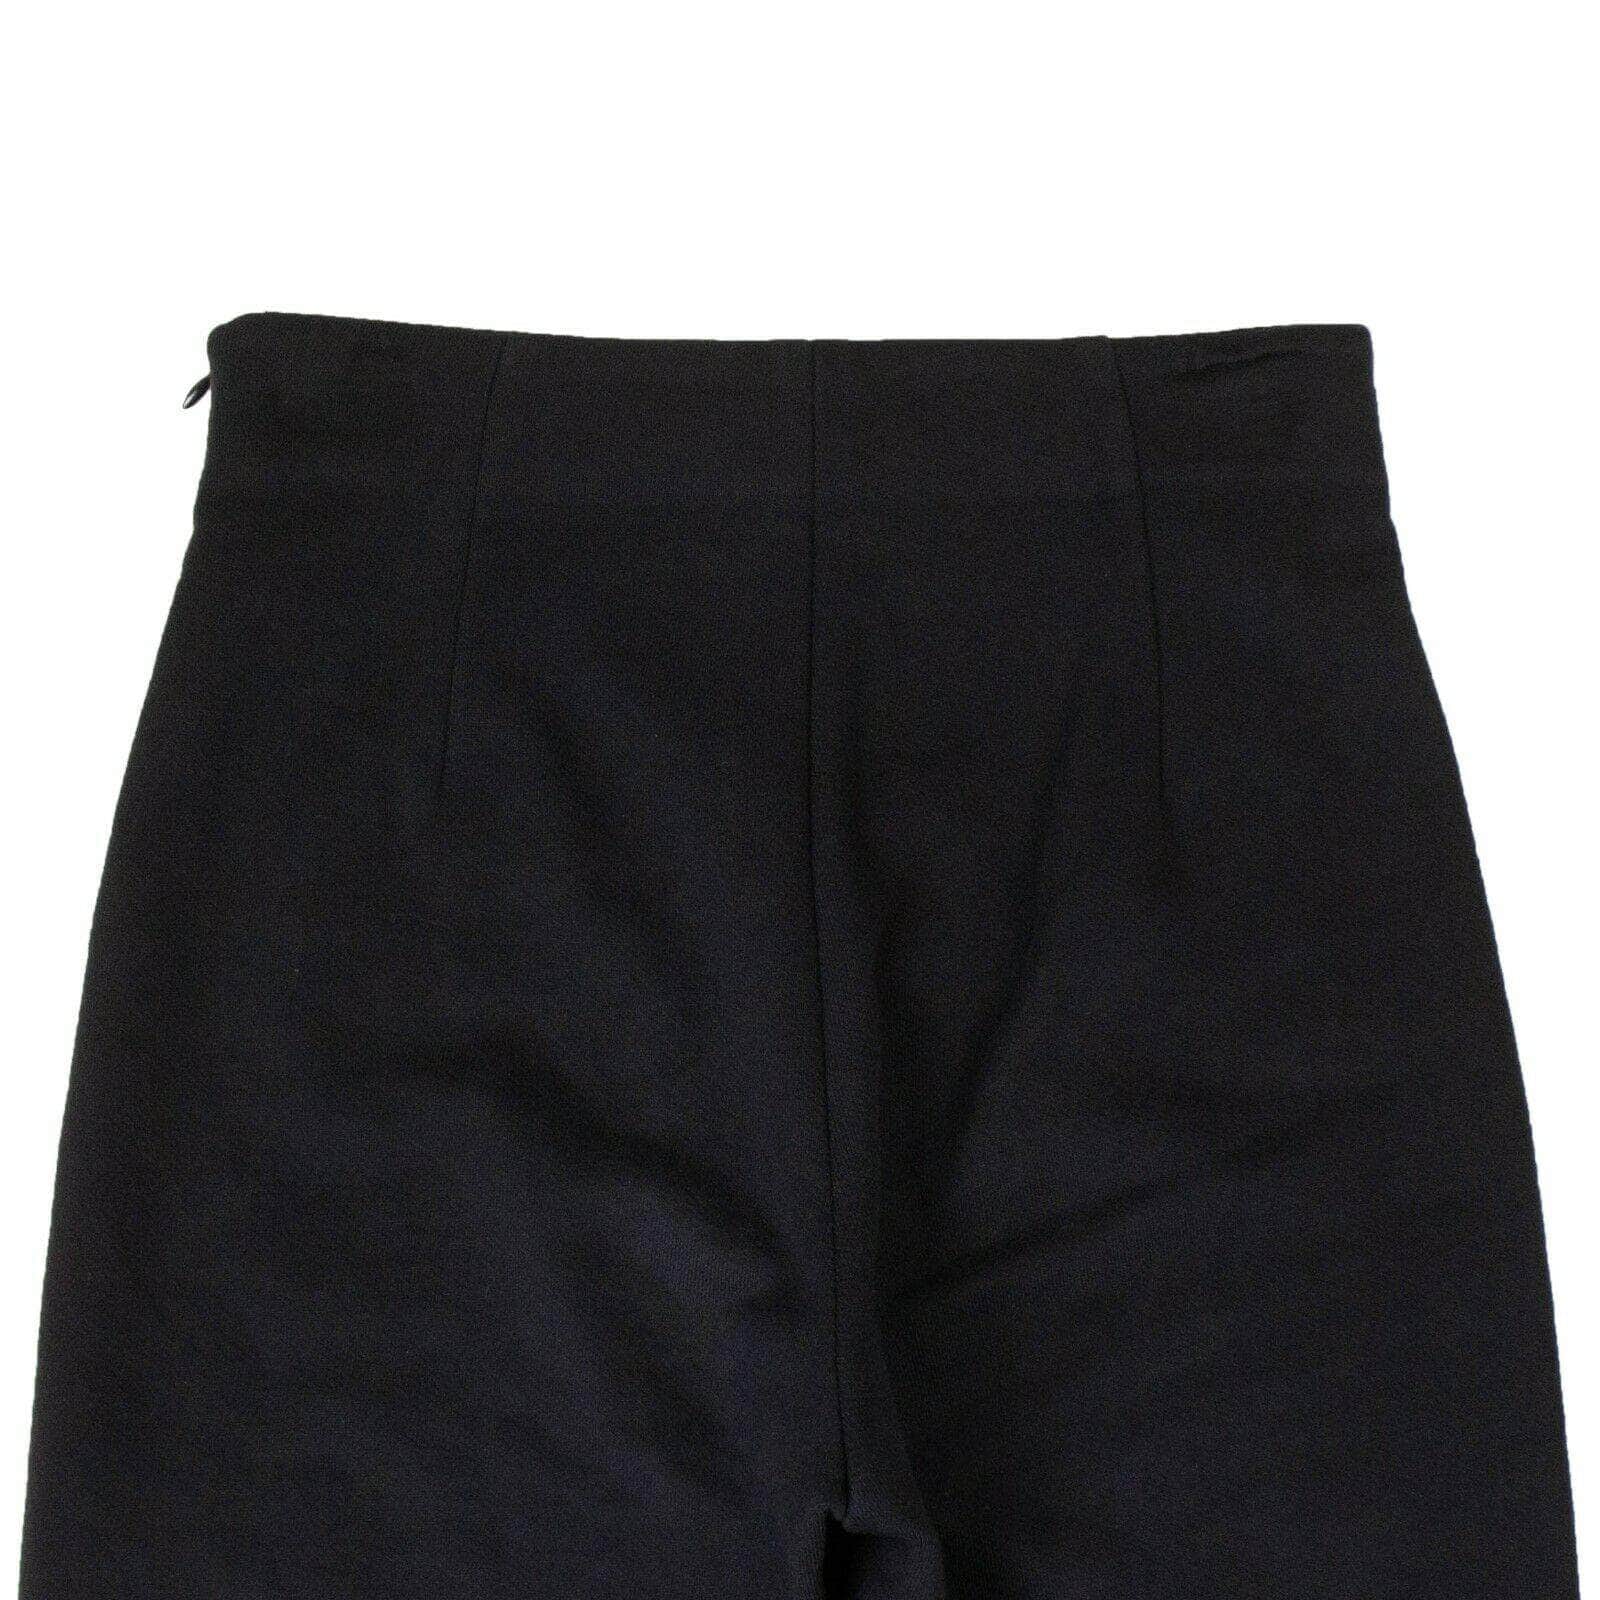 A_PLAN_APPLICATION a_plan_application, channelenable-all, couponcollection, gender-womens, main-clothing, size-s, under-250, womens-skinny-pants S Navy Blue Cropped Cigarette Pants 82NGG-AP-1017/S 82NGG-AP-1017/S